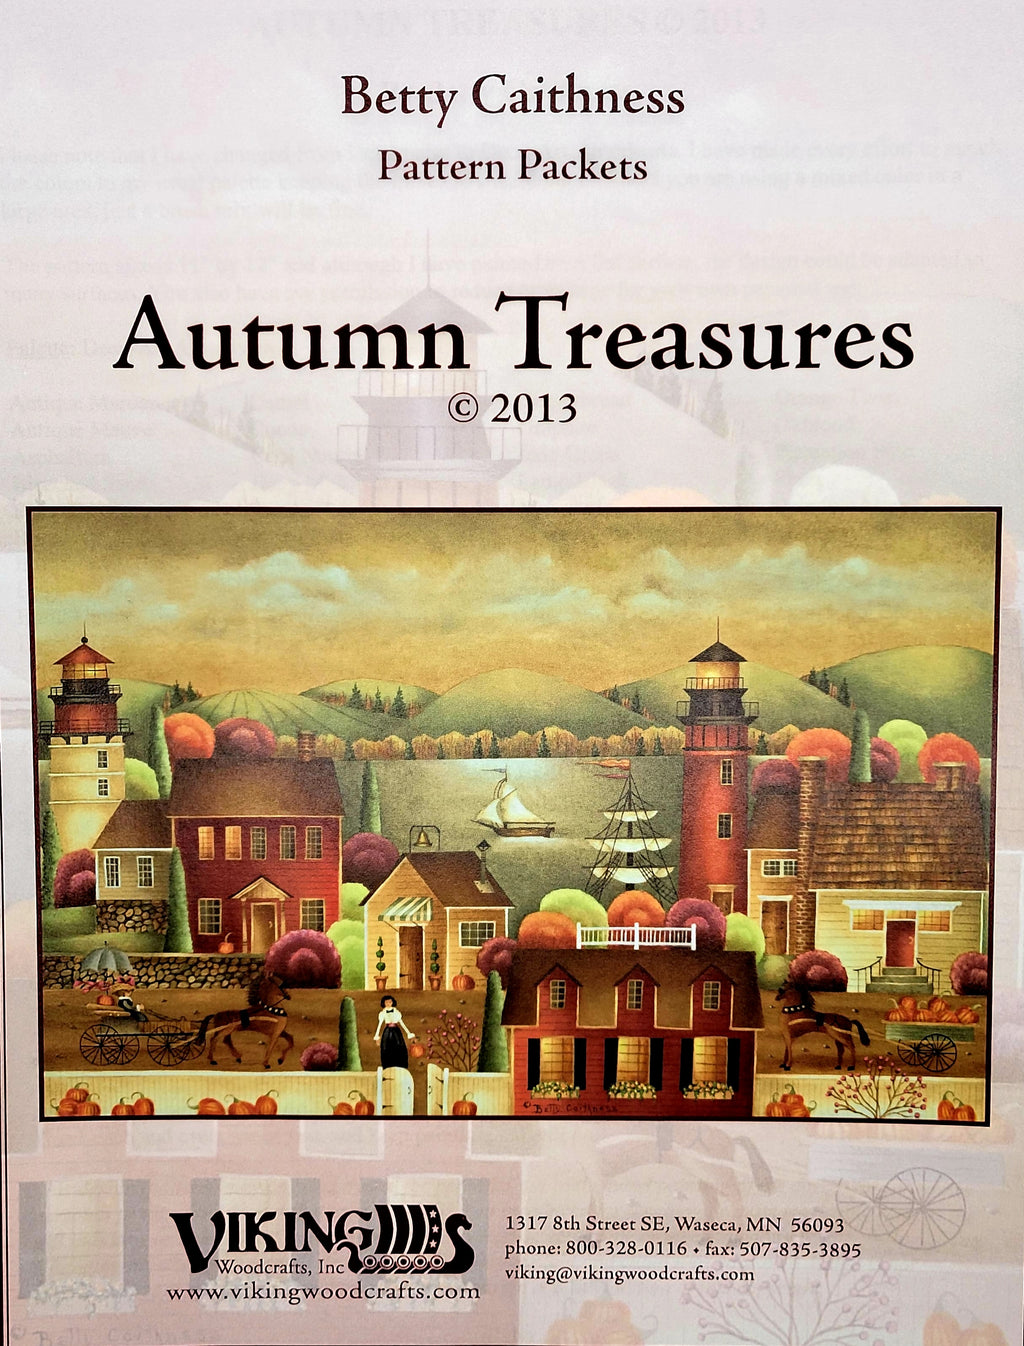 Autumn Treasures Packet by Betty Caithness